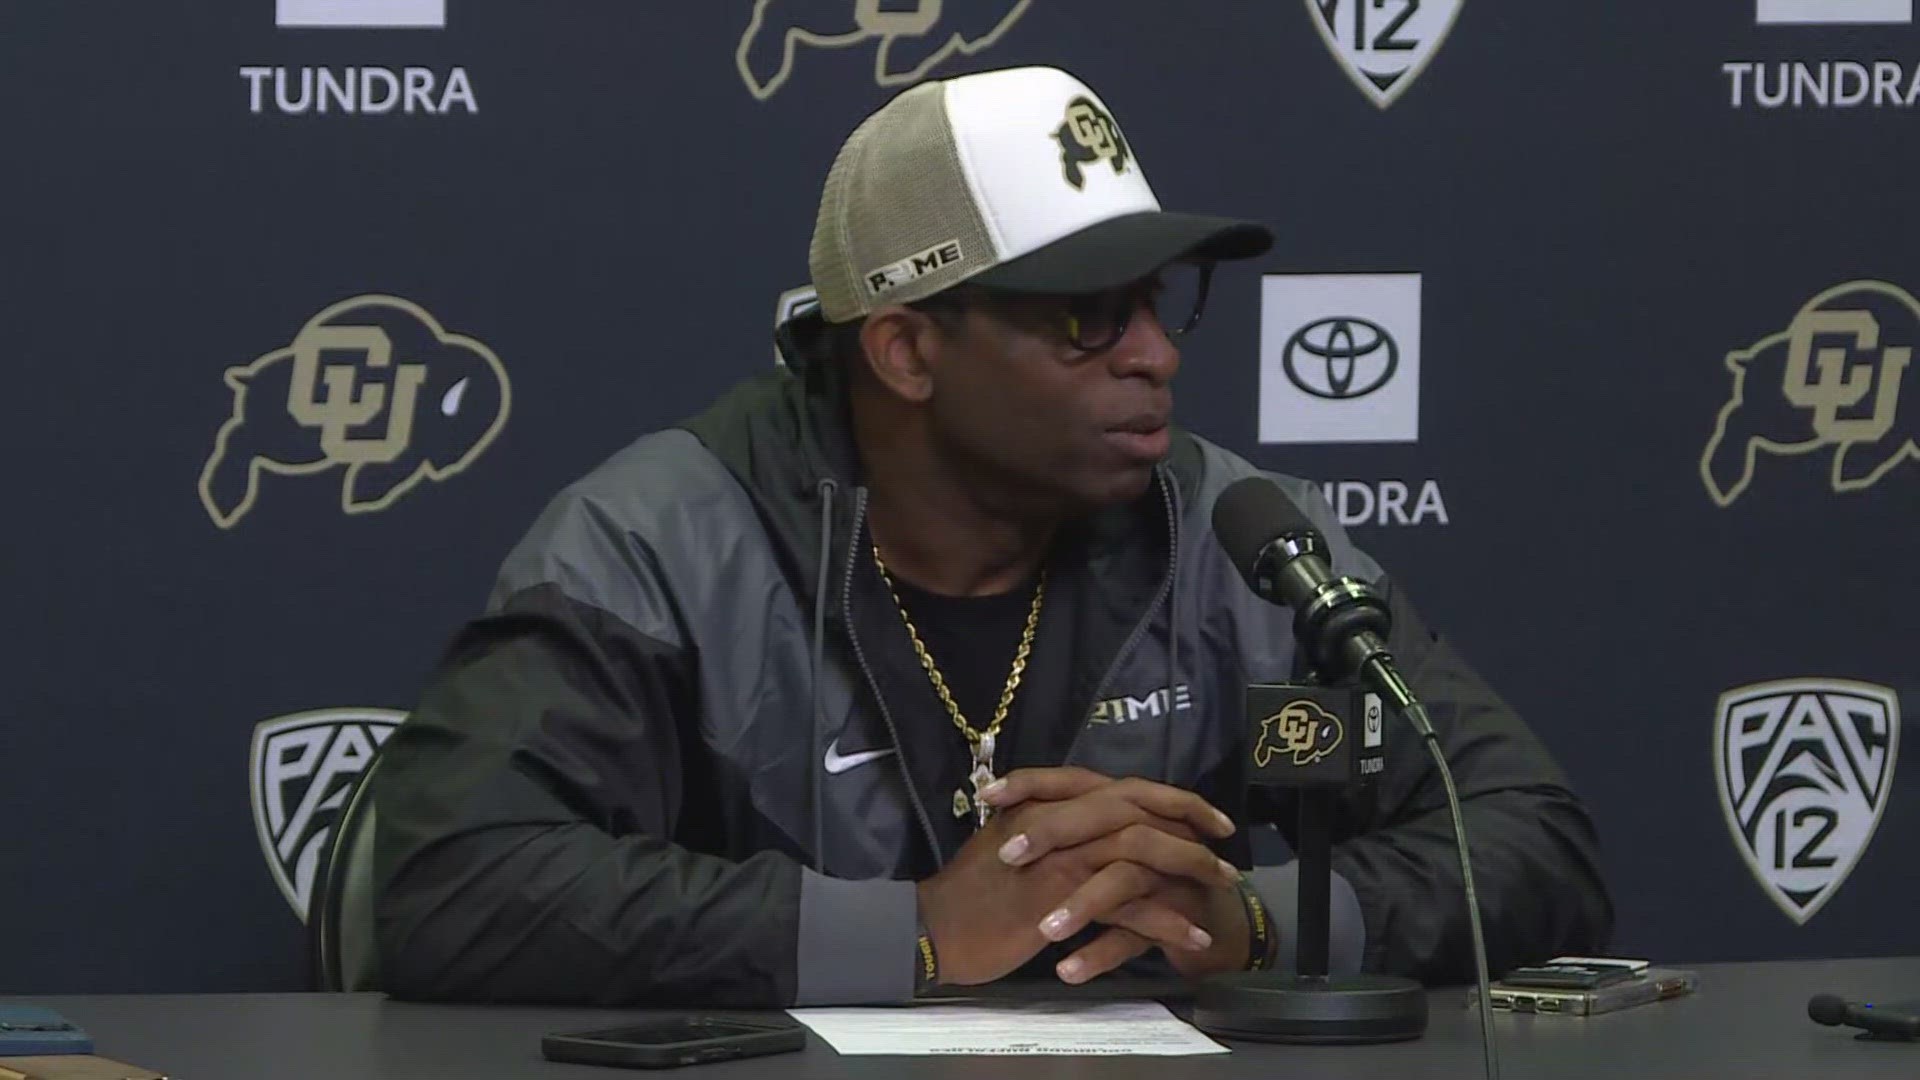 Coach Prime started his weekly press conference by discussing the burglary that took place at the Rose Bowl Saturday, where multiple Buffs players had things stolen.